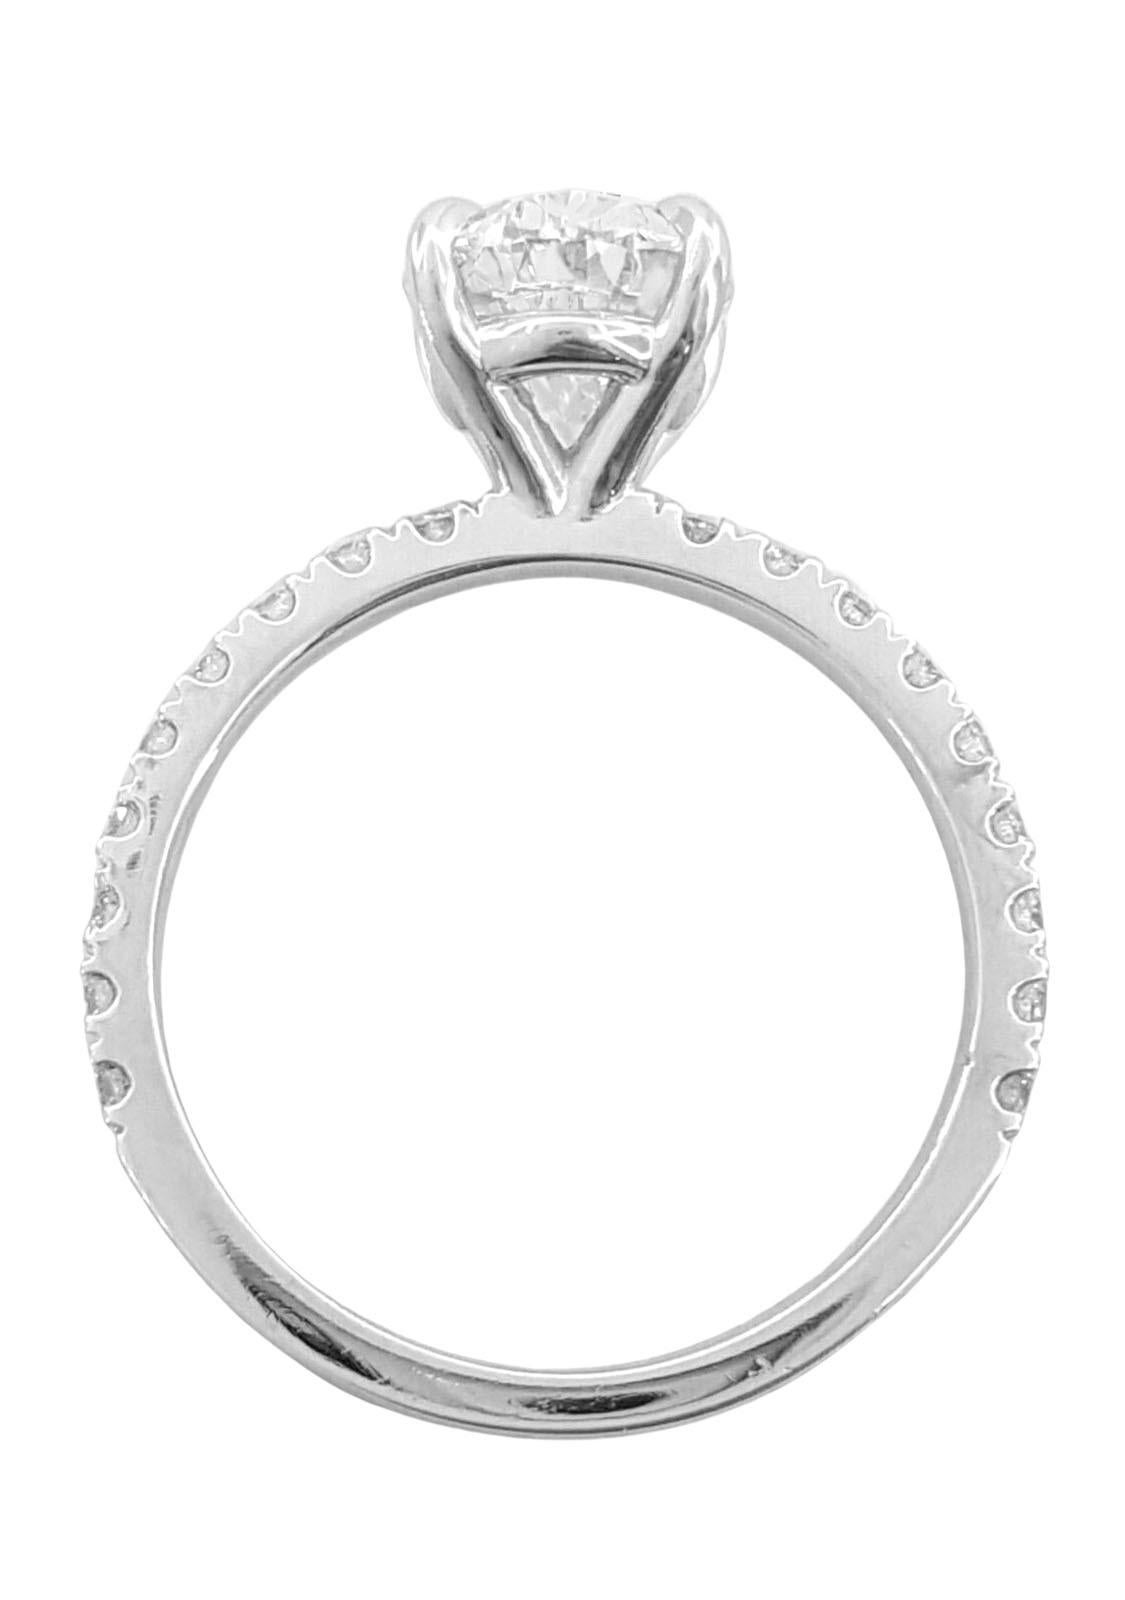 Oval Cut Oval Brilliant Cut Diamond Halo 14k White Gold Engagement Ring For Sale